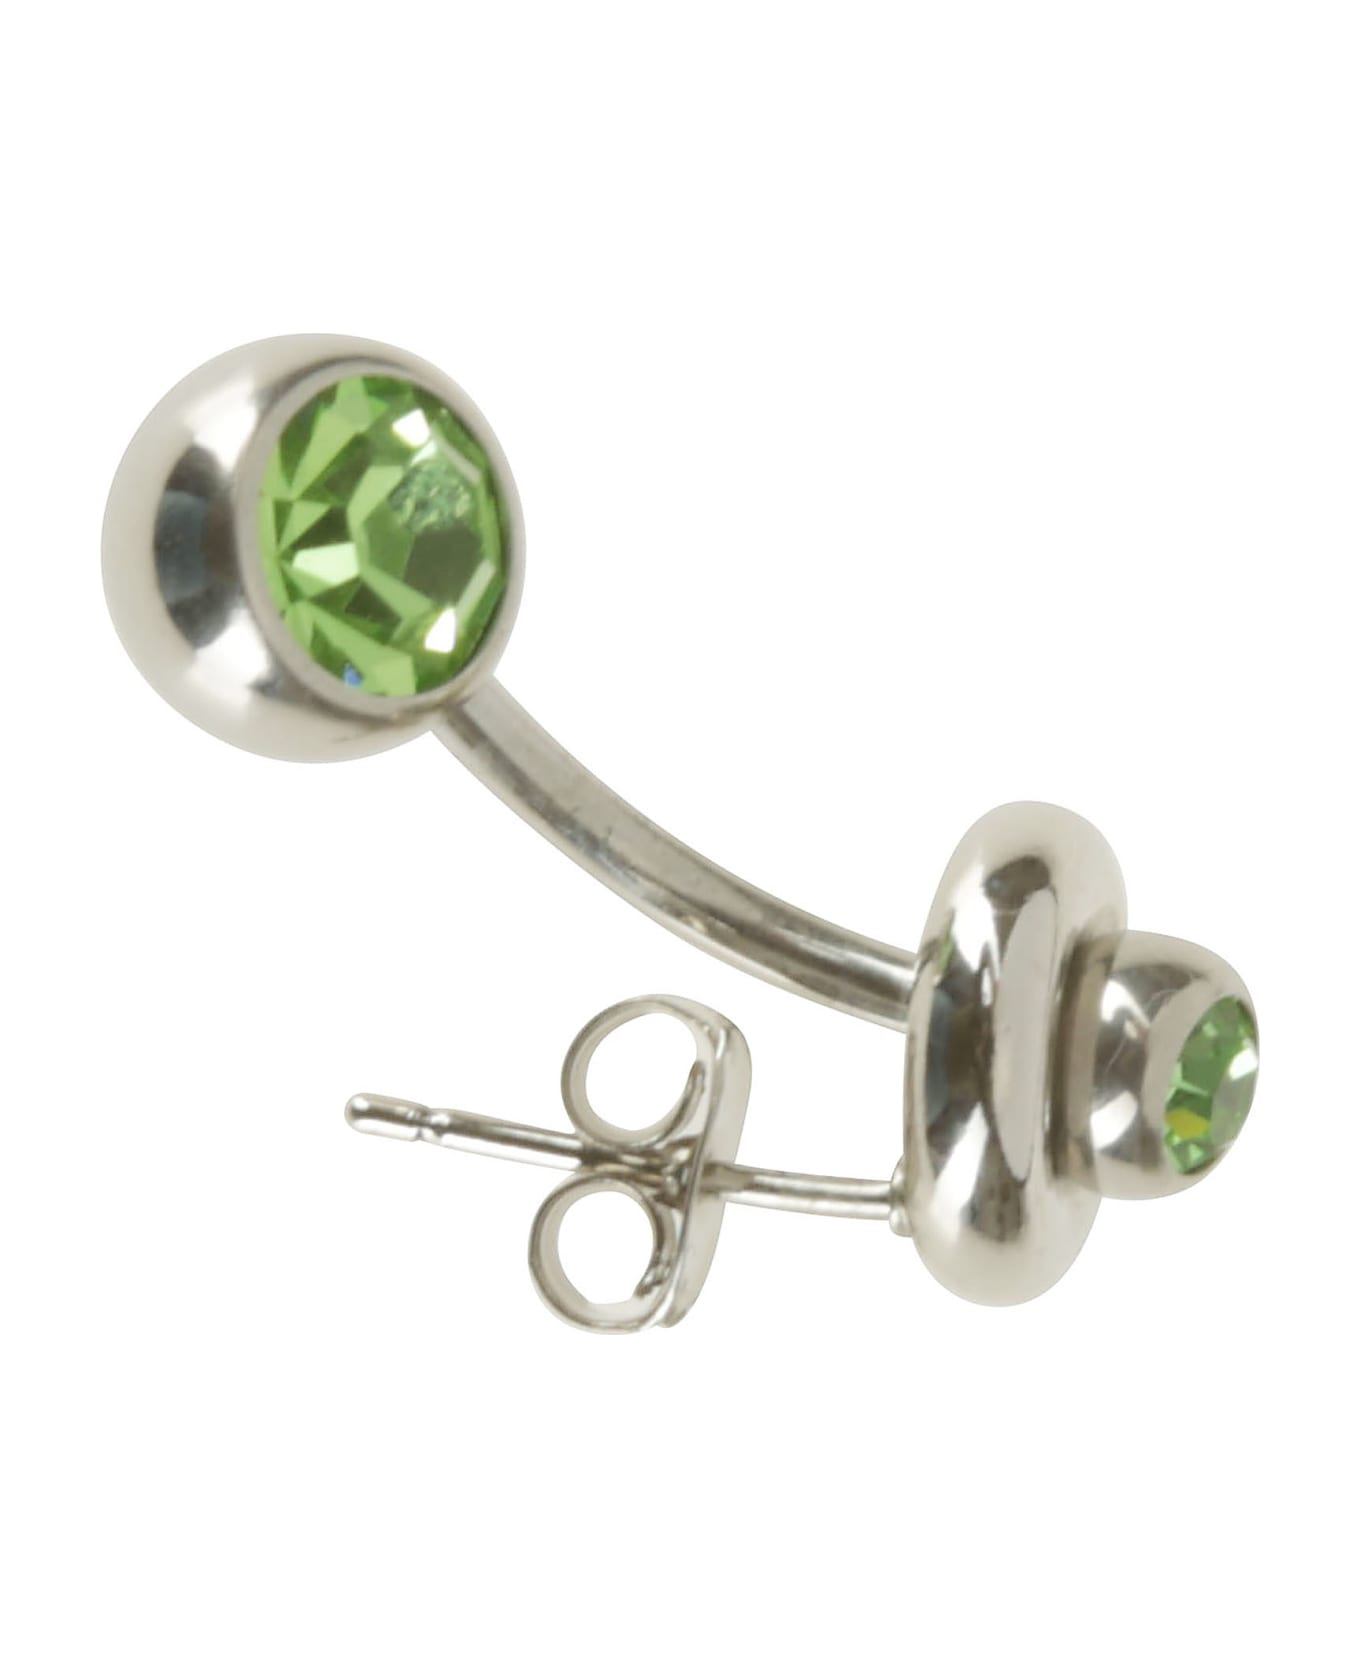 Justine Clenquet Mindy Earring - GREEN イヤリング